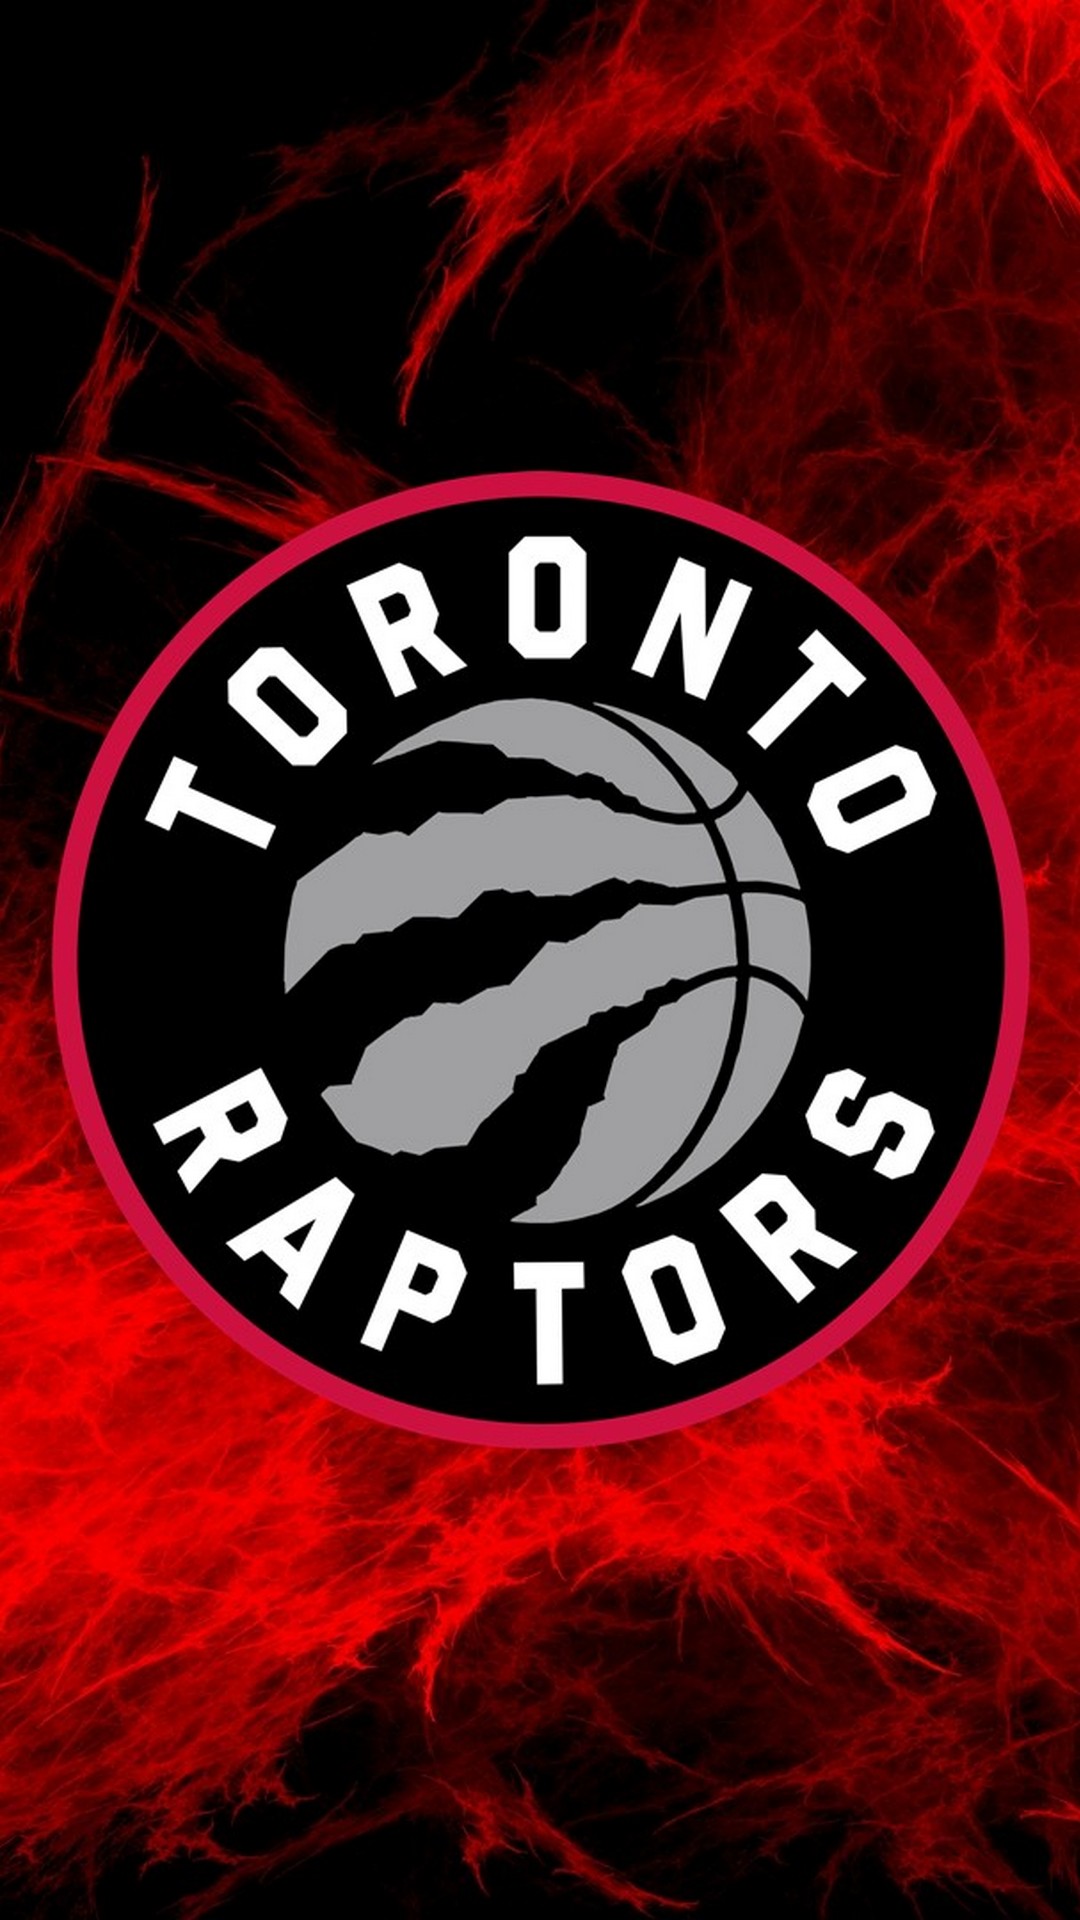 Toronto Raptors Wallpaper For Android with image resolution 1080x1920 pixel. You can make this wallpaper for your Android backgrounds, Tablet, Smartphones Screensavers and Mobile Phone Lock Screen